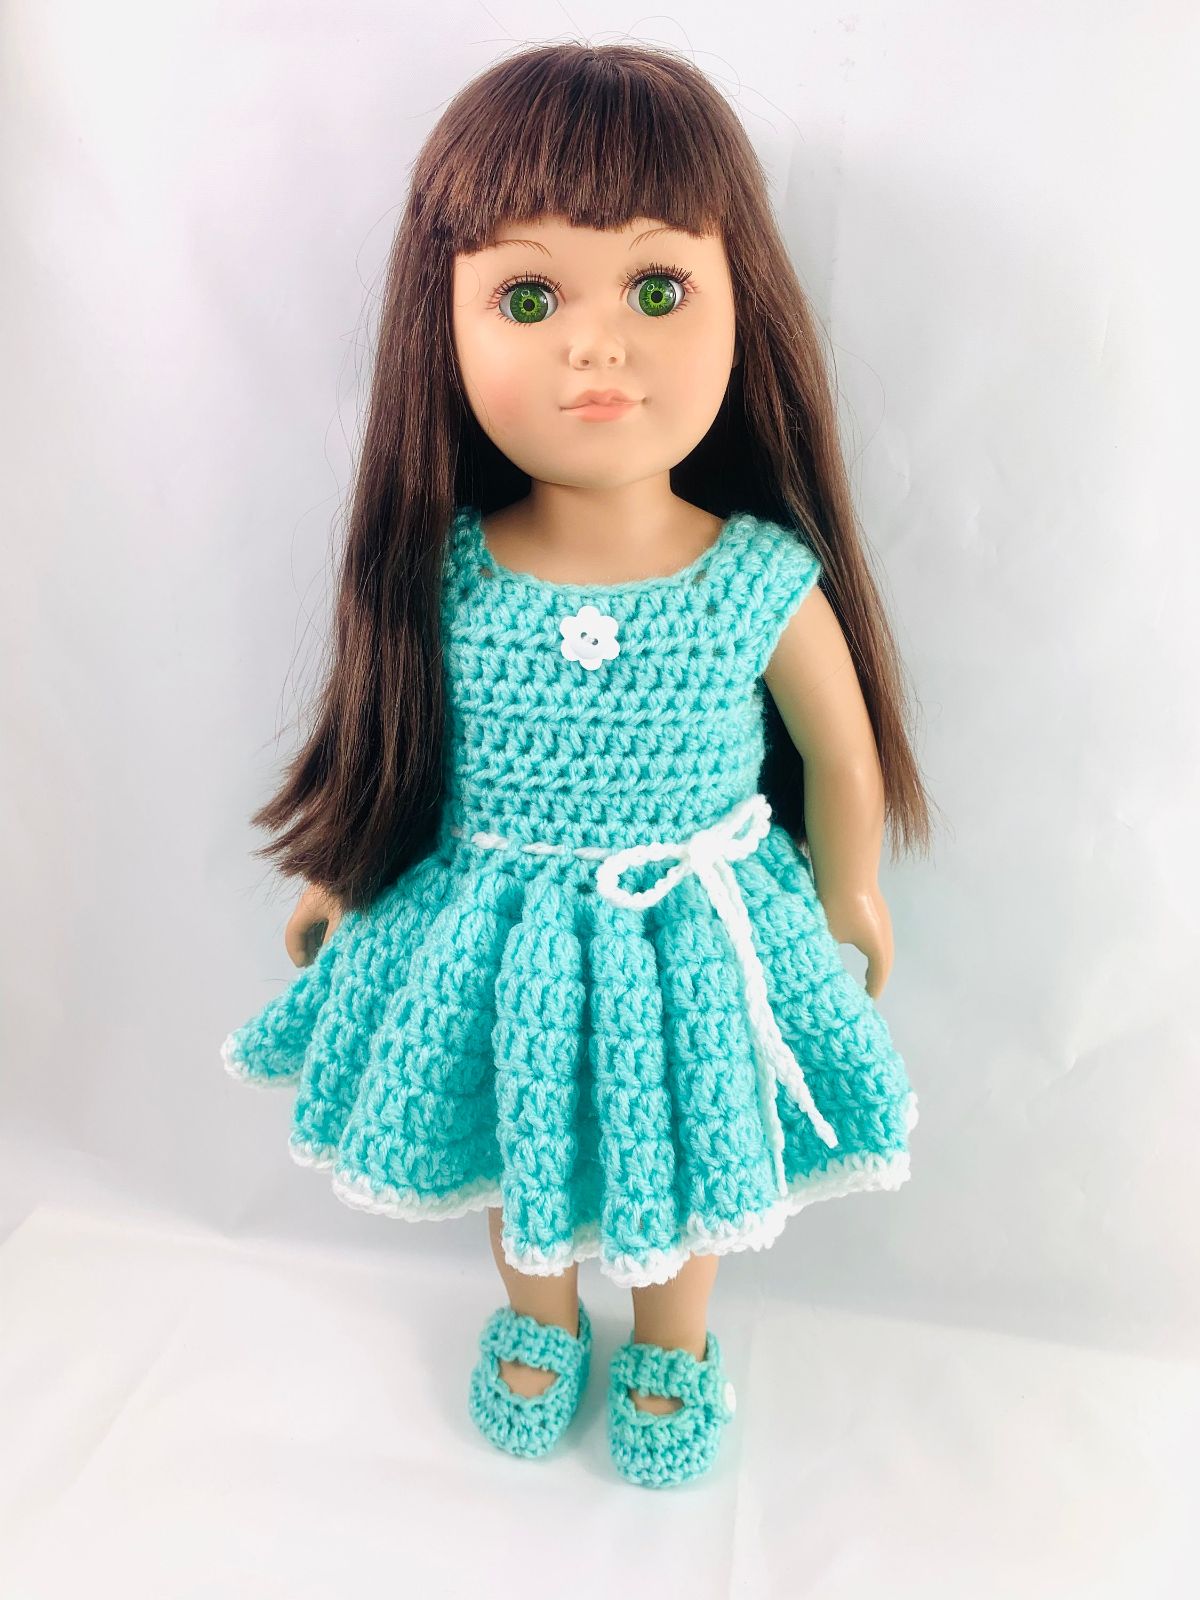 Brunette doll wearing a sleeveless blue crochet dress with a white bow around the waist and matching blue slip on shoes.